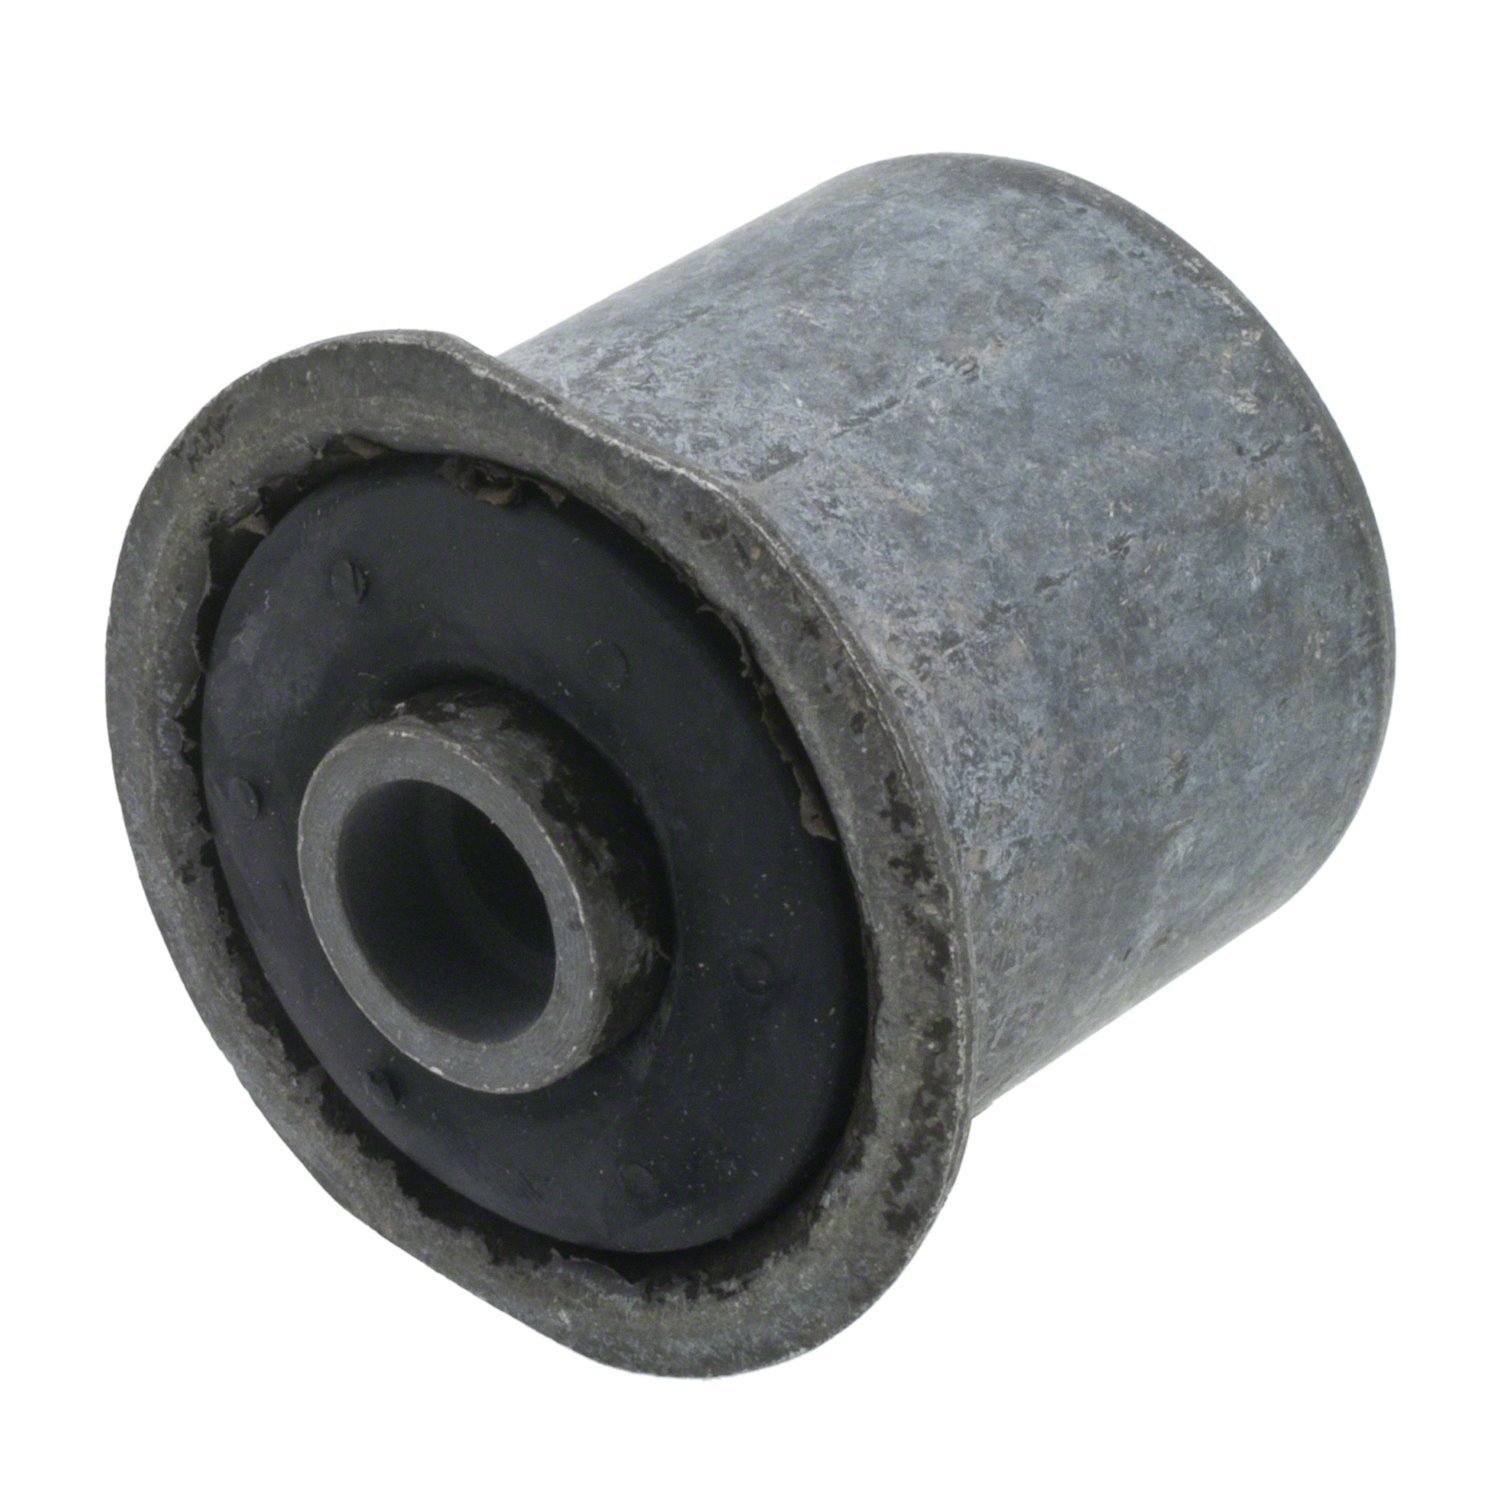 K200180 Upper Control Arm Bushing - Rear axle for Select 2005-2010 Dodge, Jeep Models